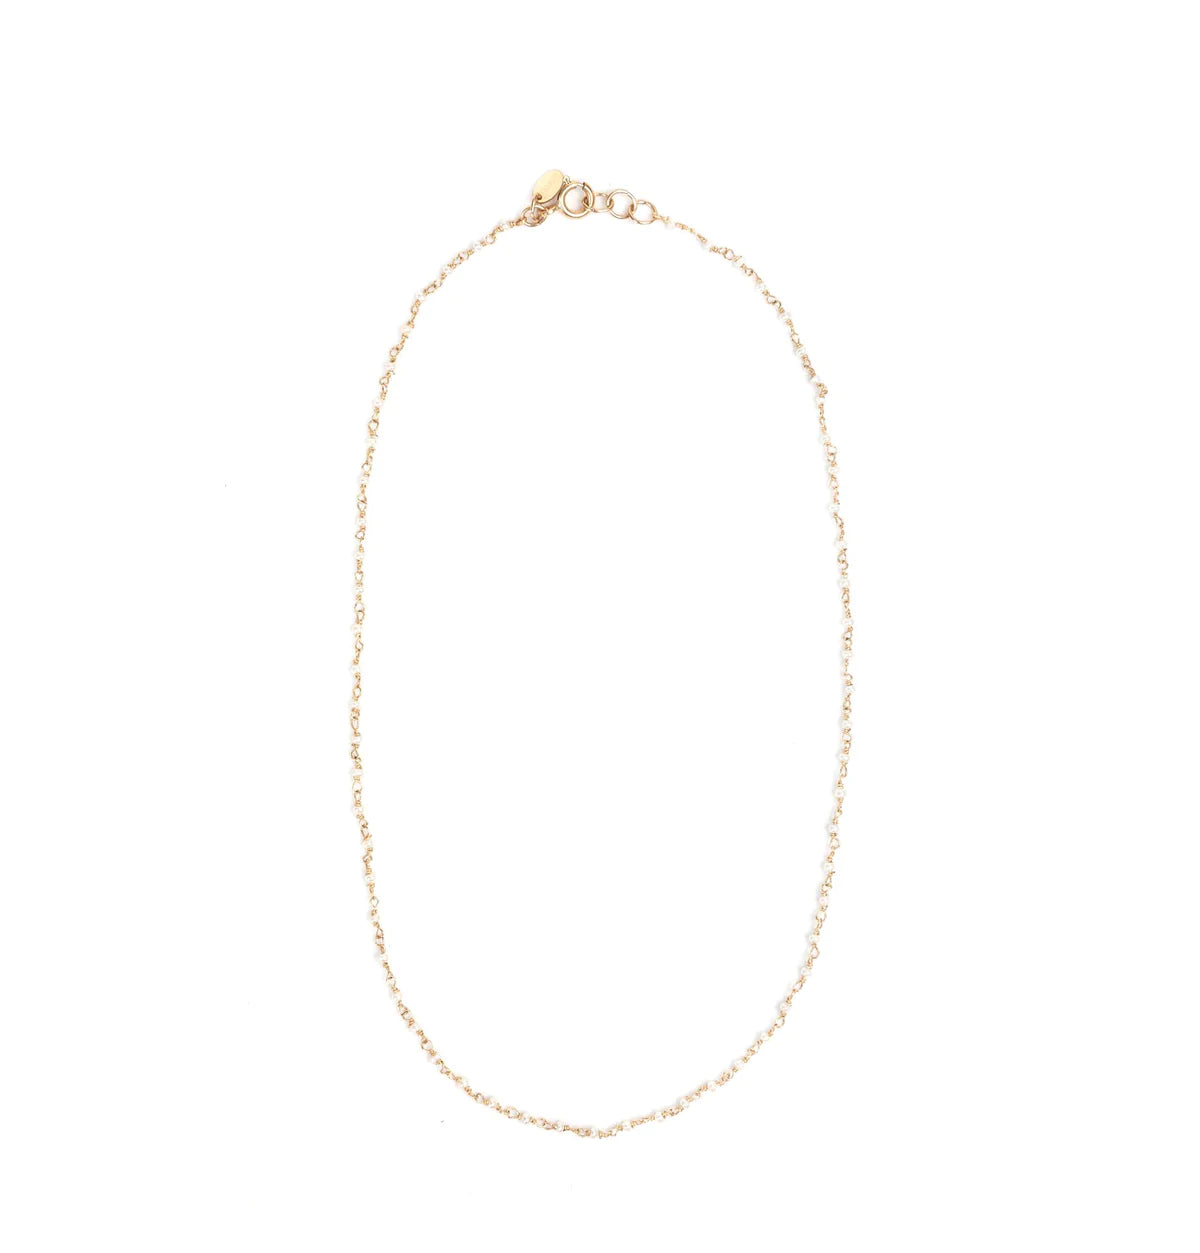 Pearl Necklace #1 (1.5-2mm) - Pearl & Yellow Gold